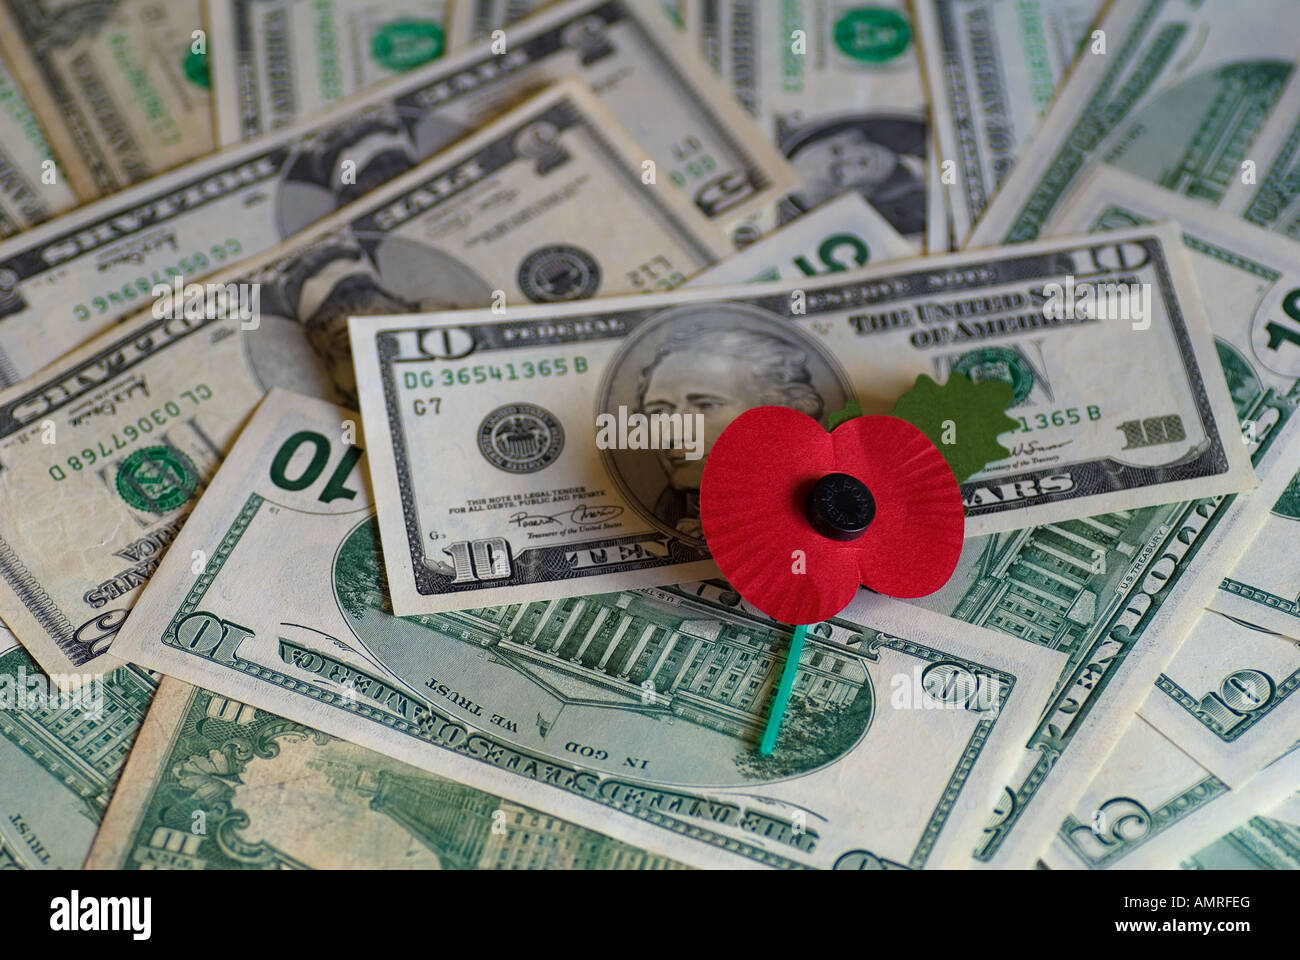 Rememberance Poppy on a pile of Dollars Stock Photo